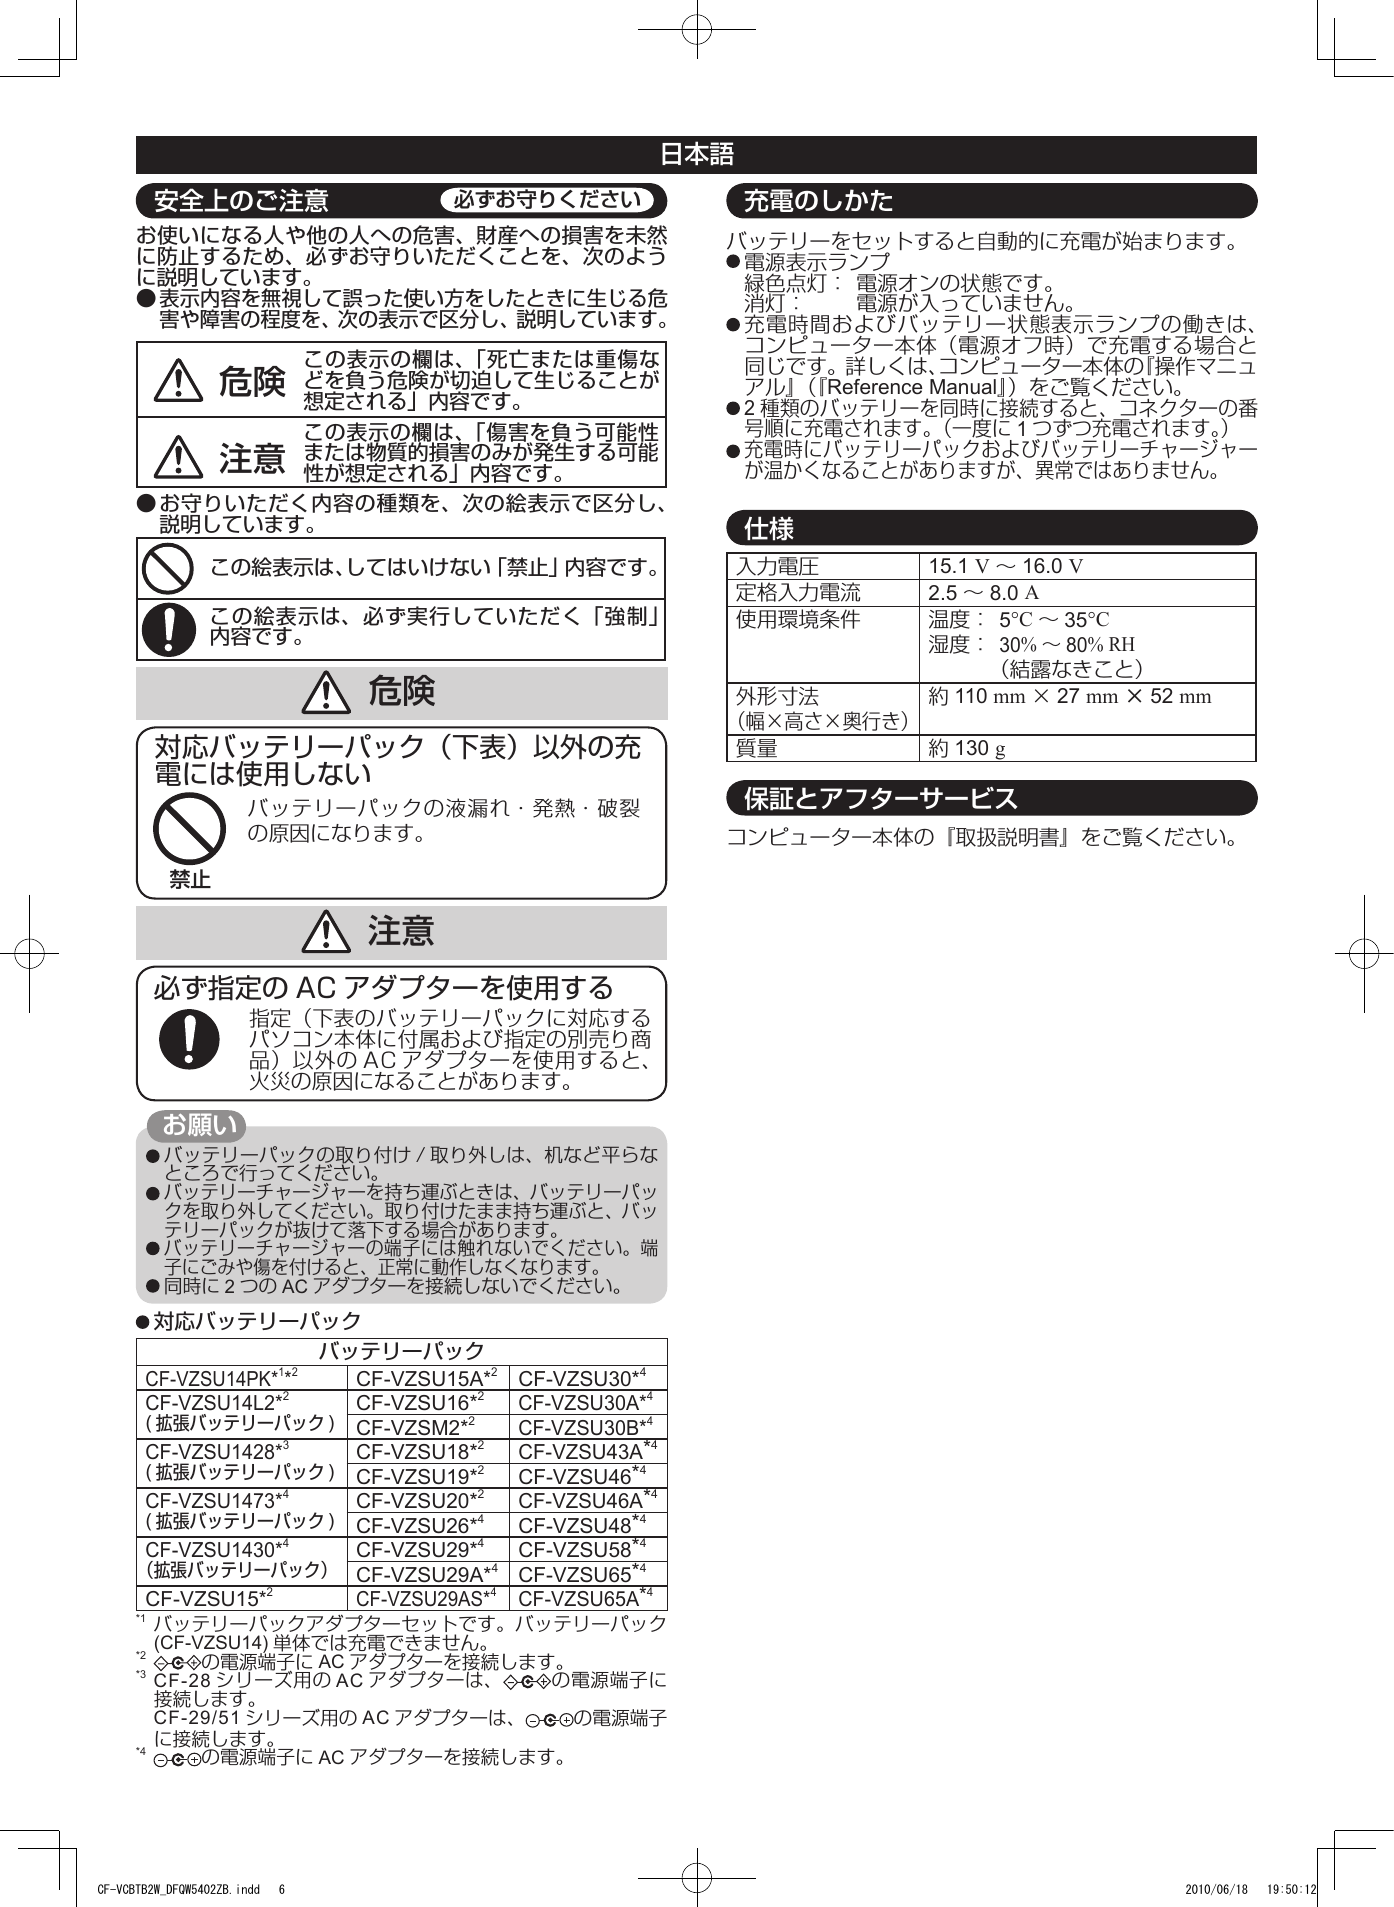 Page 5 of 8 - Panasonic CF-VCBxxx (Battery Charger) Operating Instructions User Manual : (English/ German/ French/ Korean/ Japanese) (Revision) Vcbtb2w-oi-dfqw5402ya-non-nonlogo-JMGFKO-p20110780